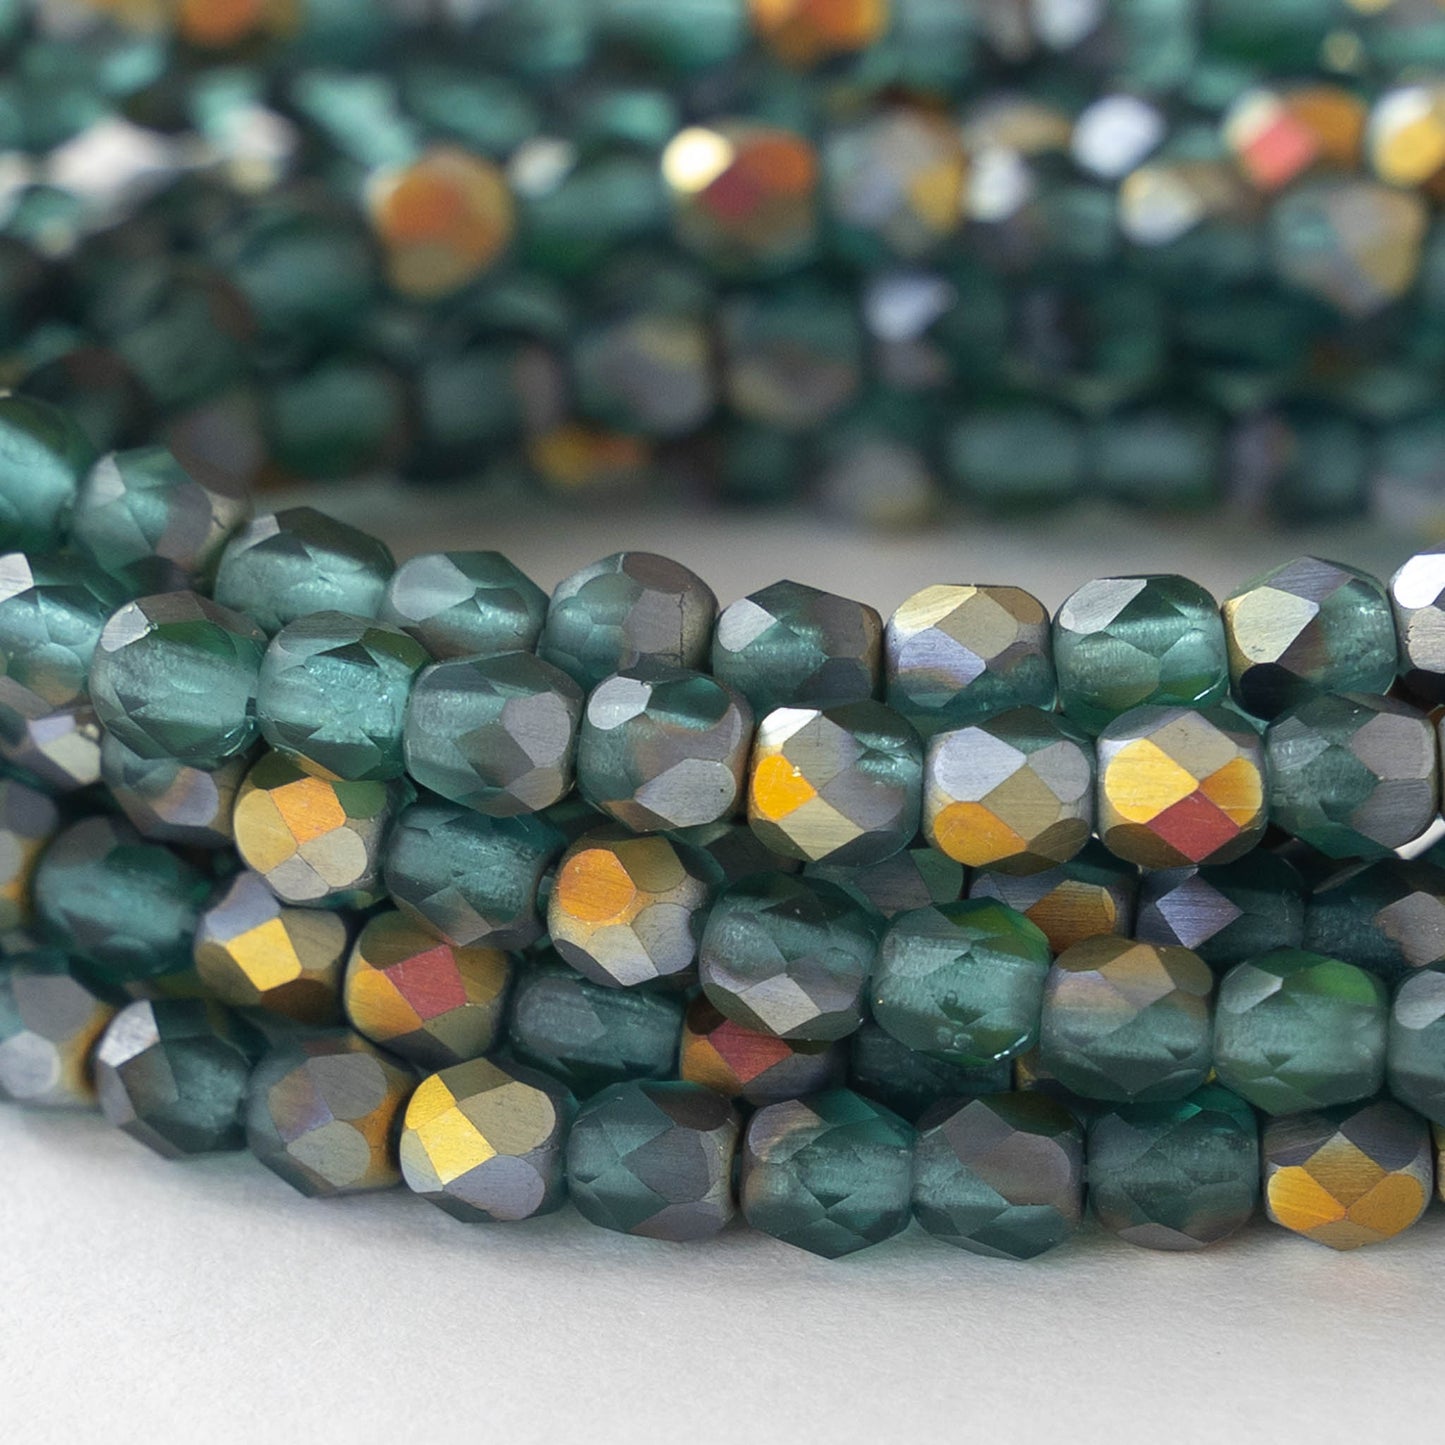 4mm Faceted Round Beads - Teal Semi Matte Marea Finish- 50 beads